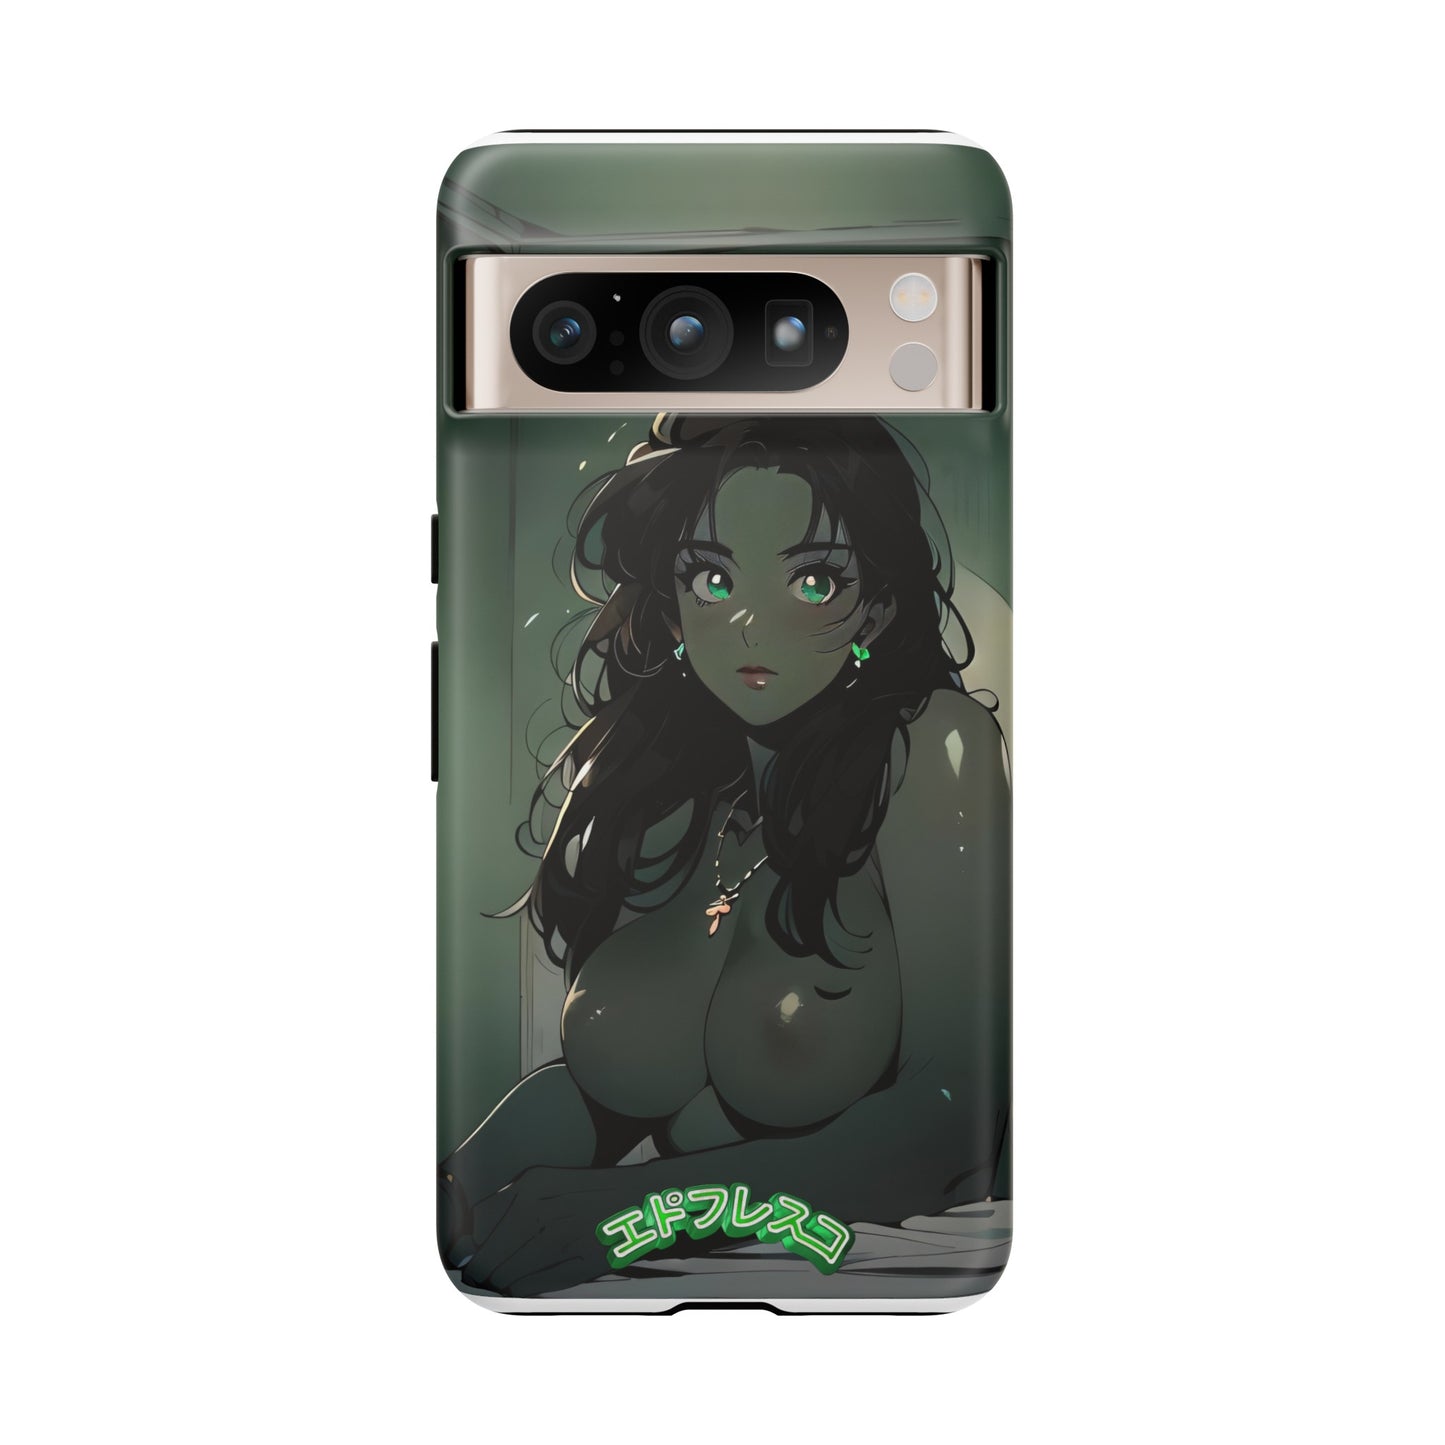 Anime Style Art Tough Cases- "What a Demon Looks Like"